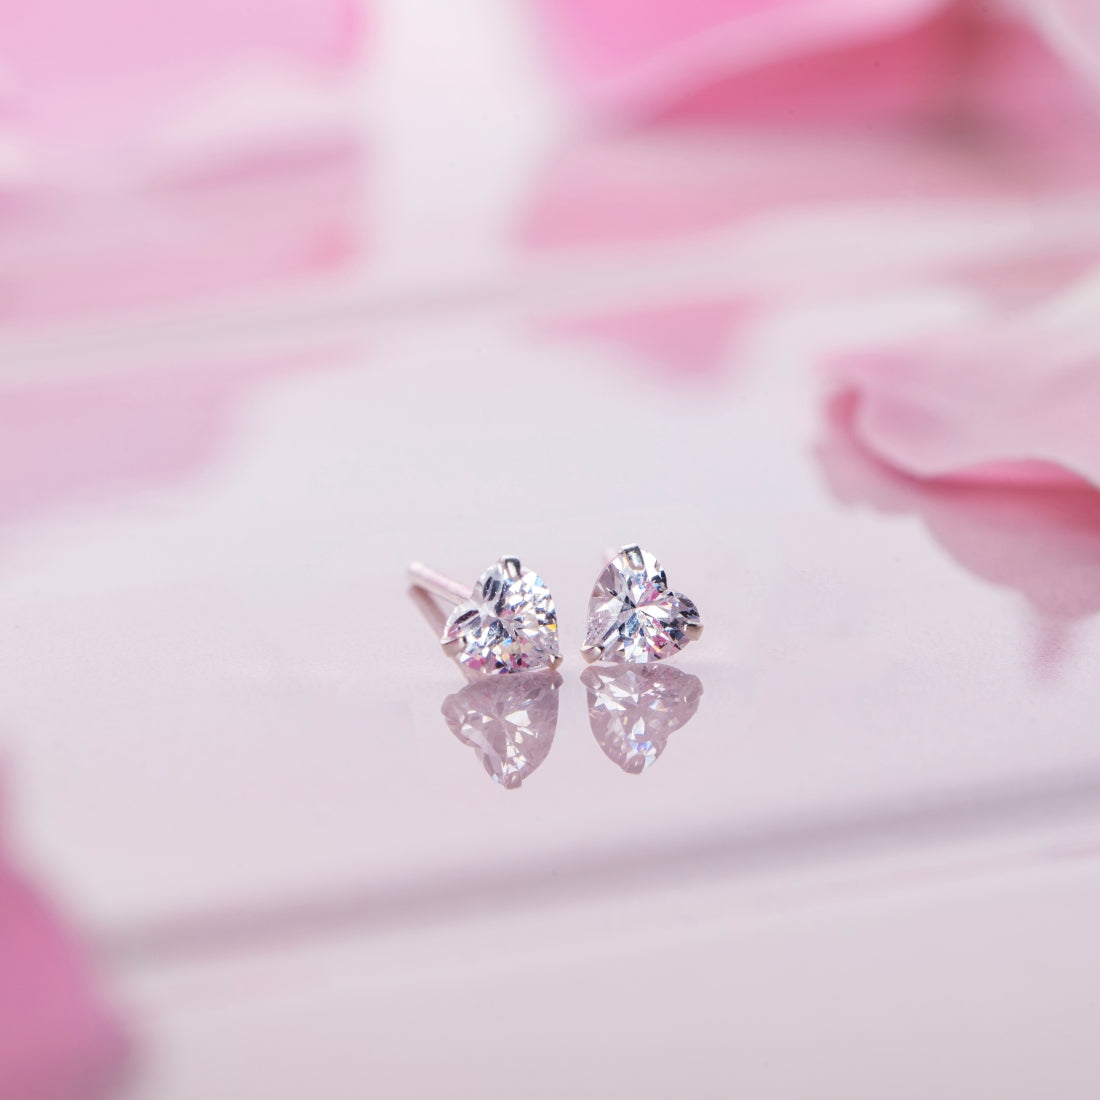 Tiny Heart Solitaire 925 Silver Earrings